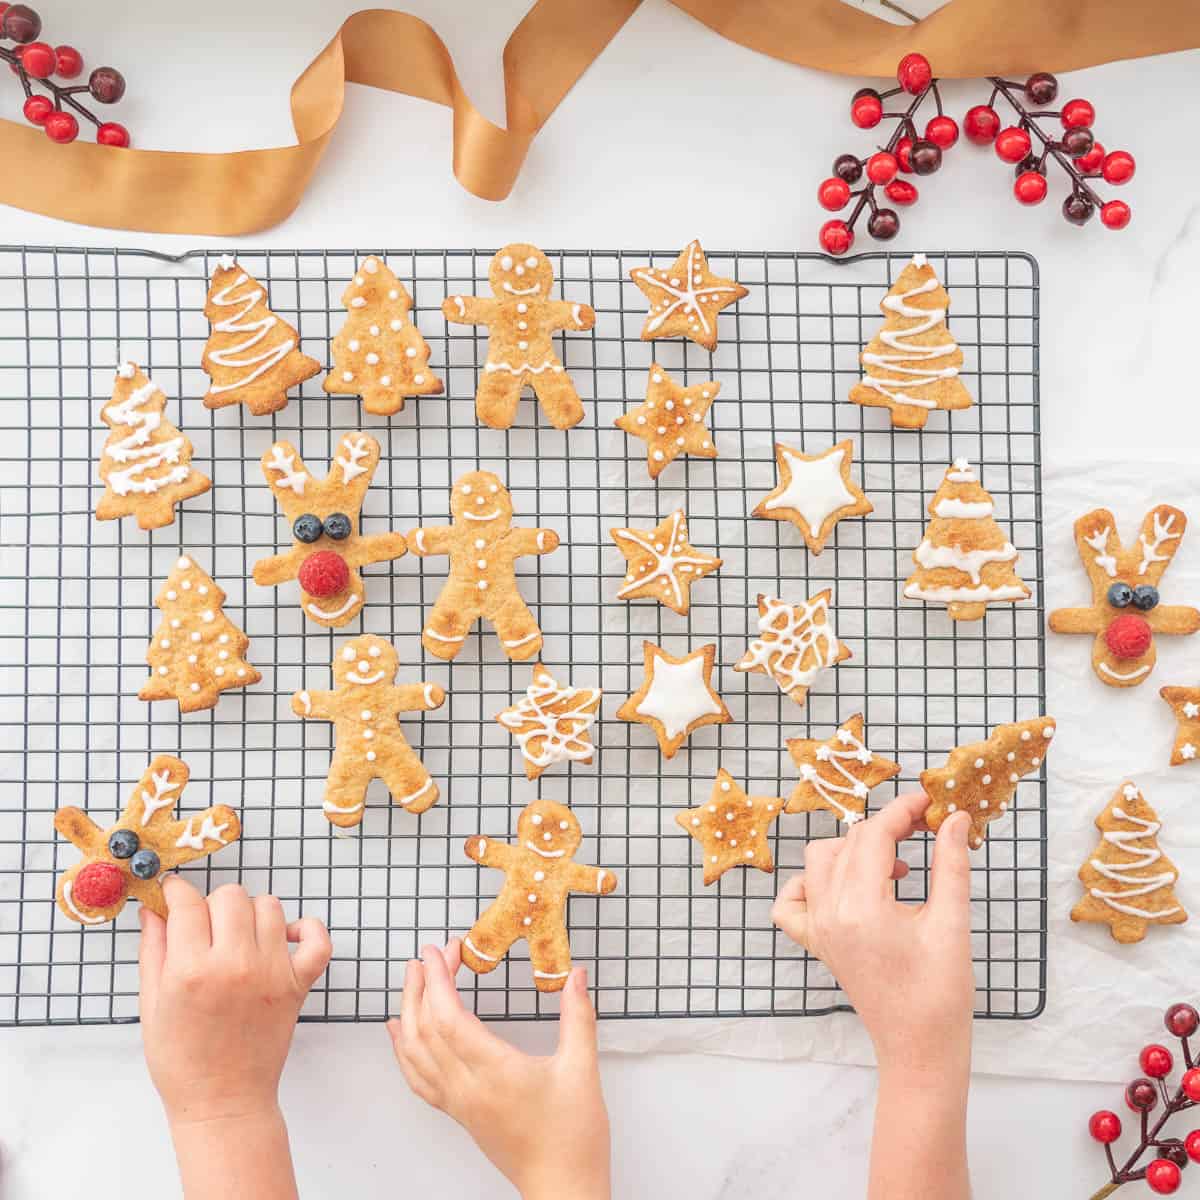 Three children's hand reaching for a christmas cookie cooling on a drying rack.